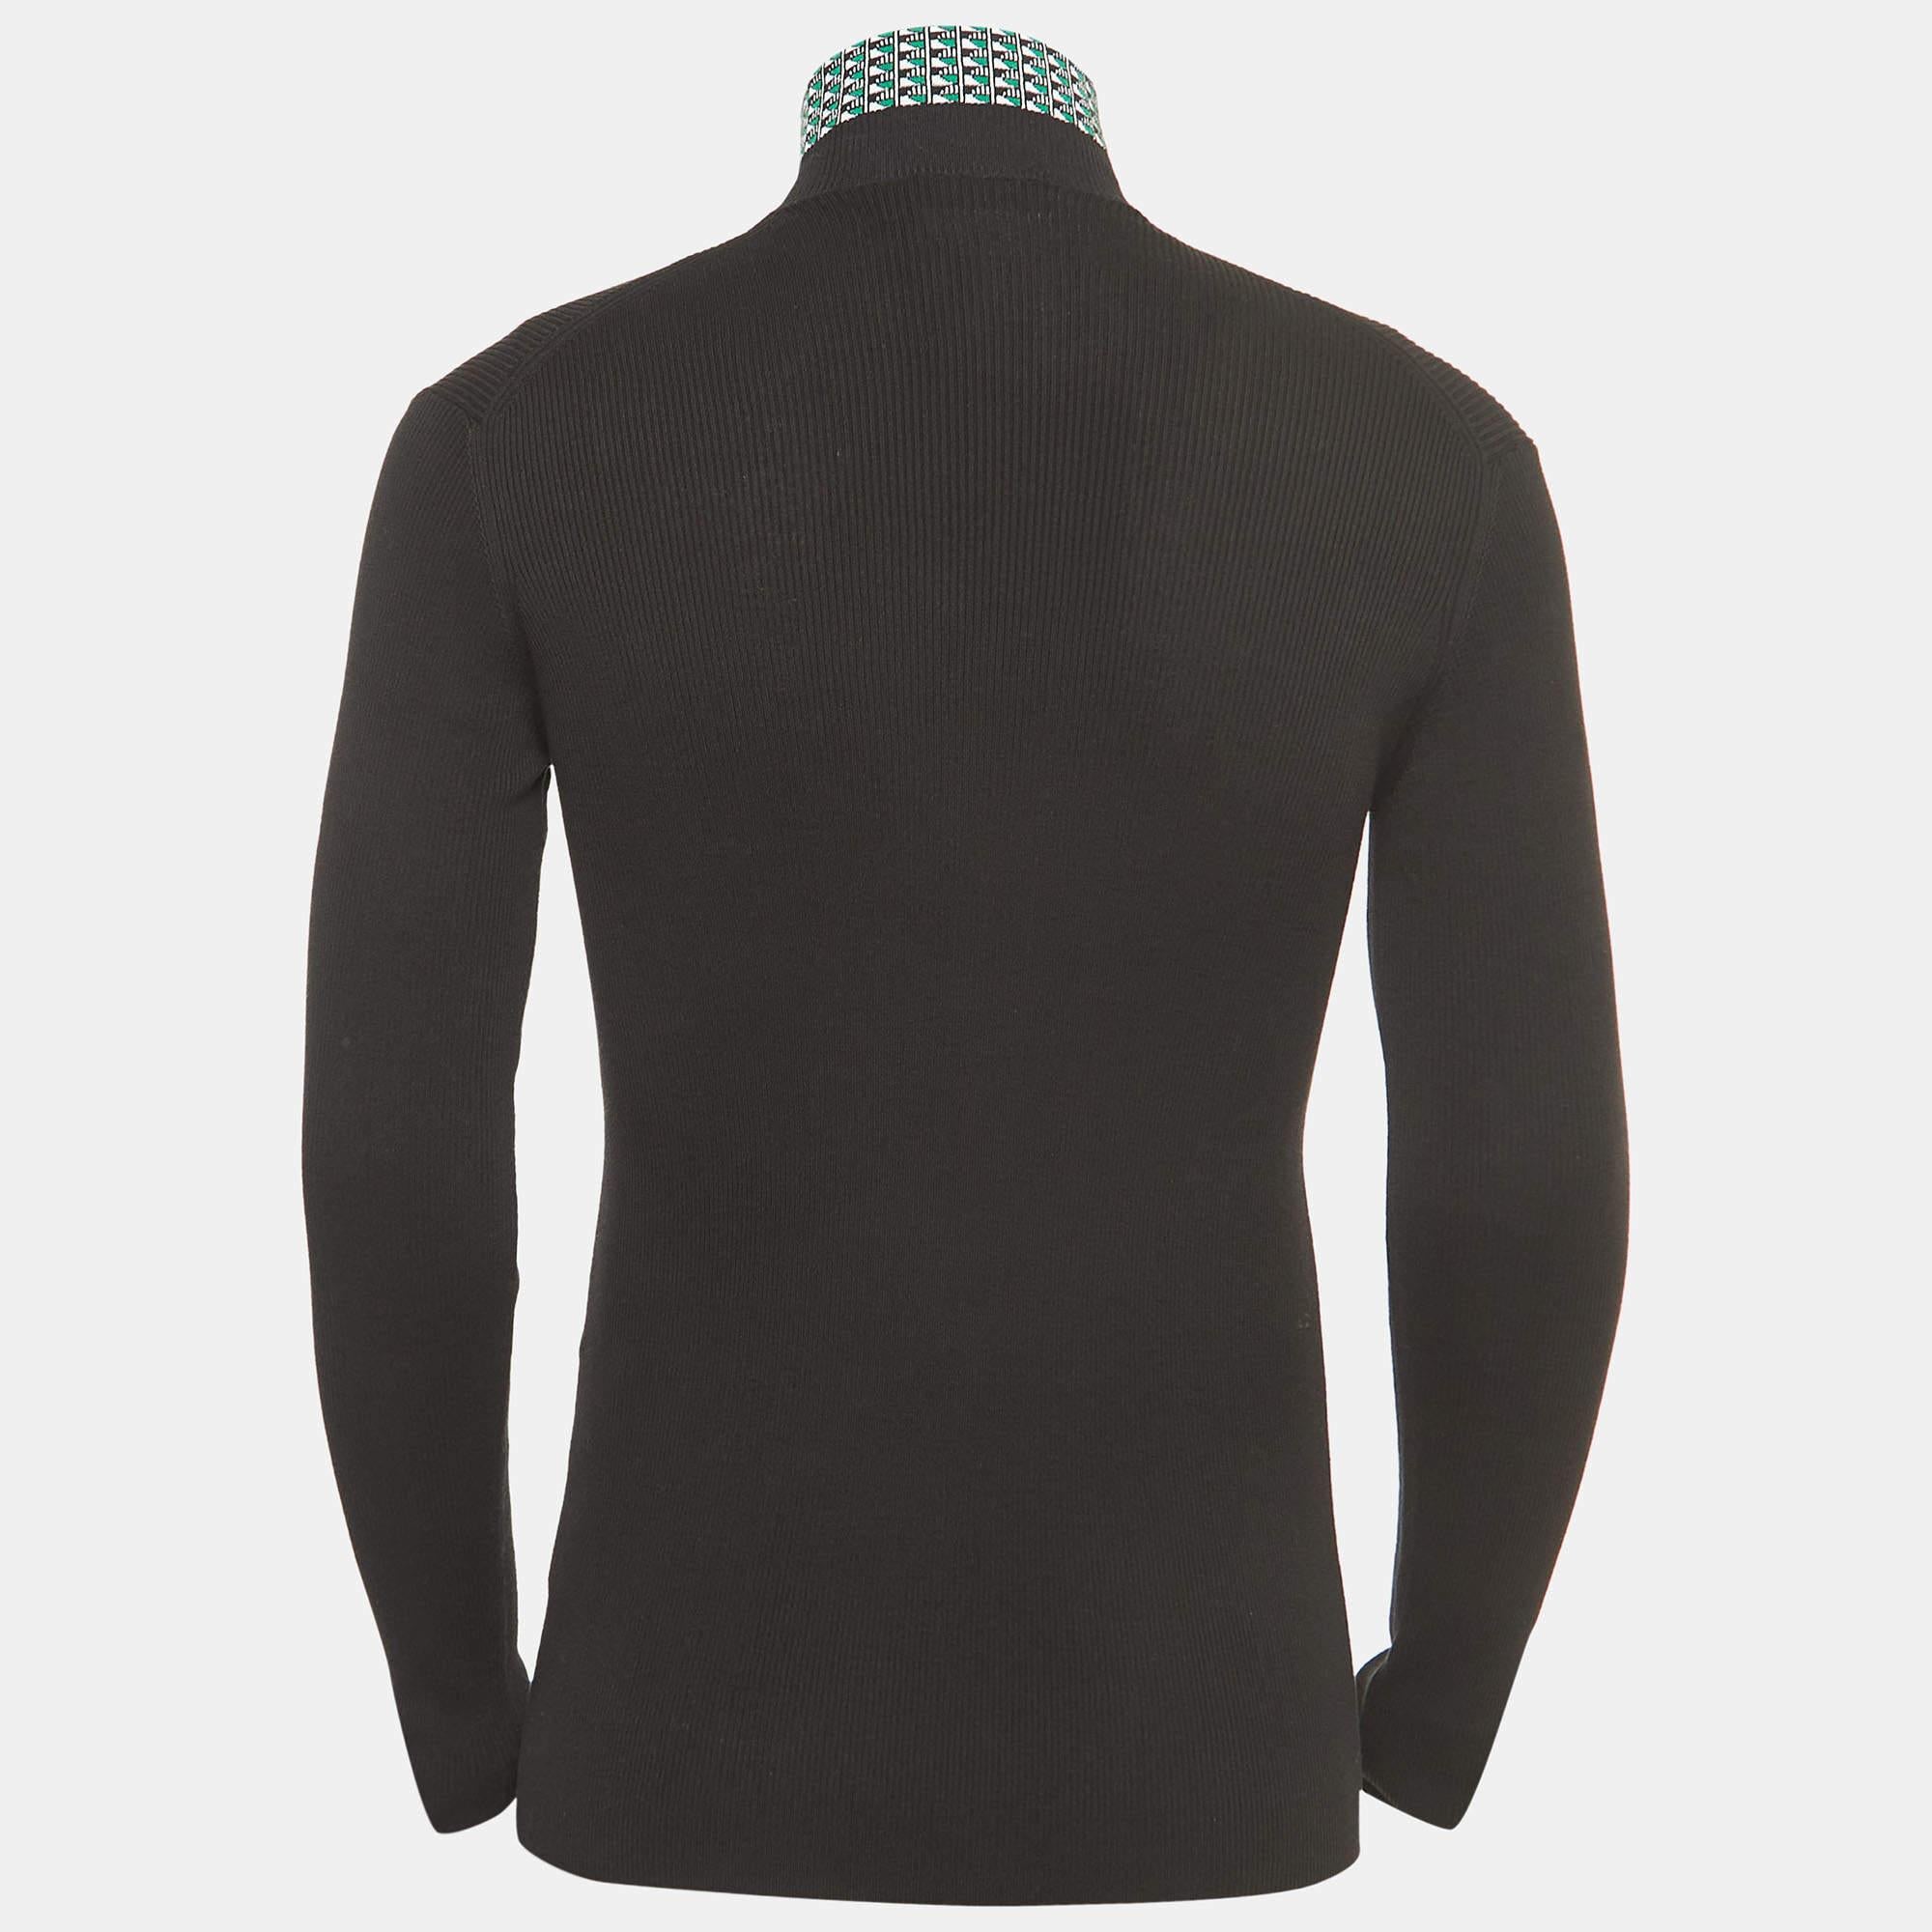 The Prada sweater is a luxurious and versatile wardrobe staple. Crafted from high-quality cotton, it features a sophisticated jacquard pattern and a cozy turtleneck. This timeless piece seamlessly blends comfort with elevated style, making it a